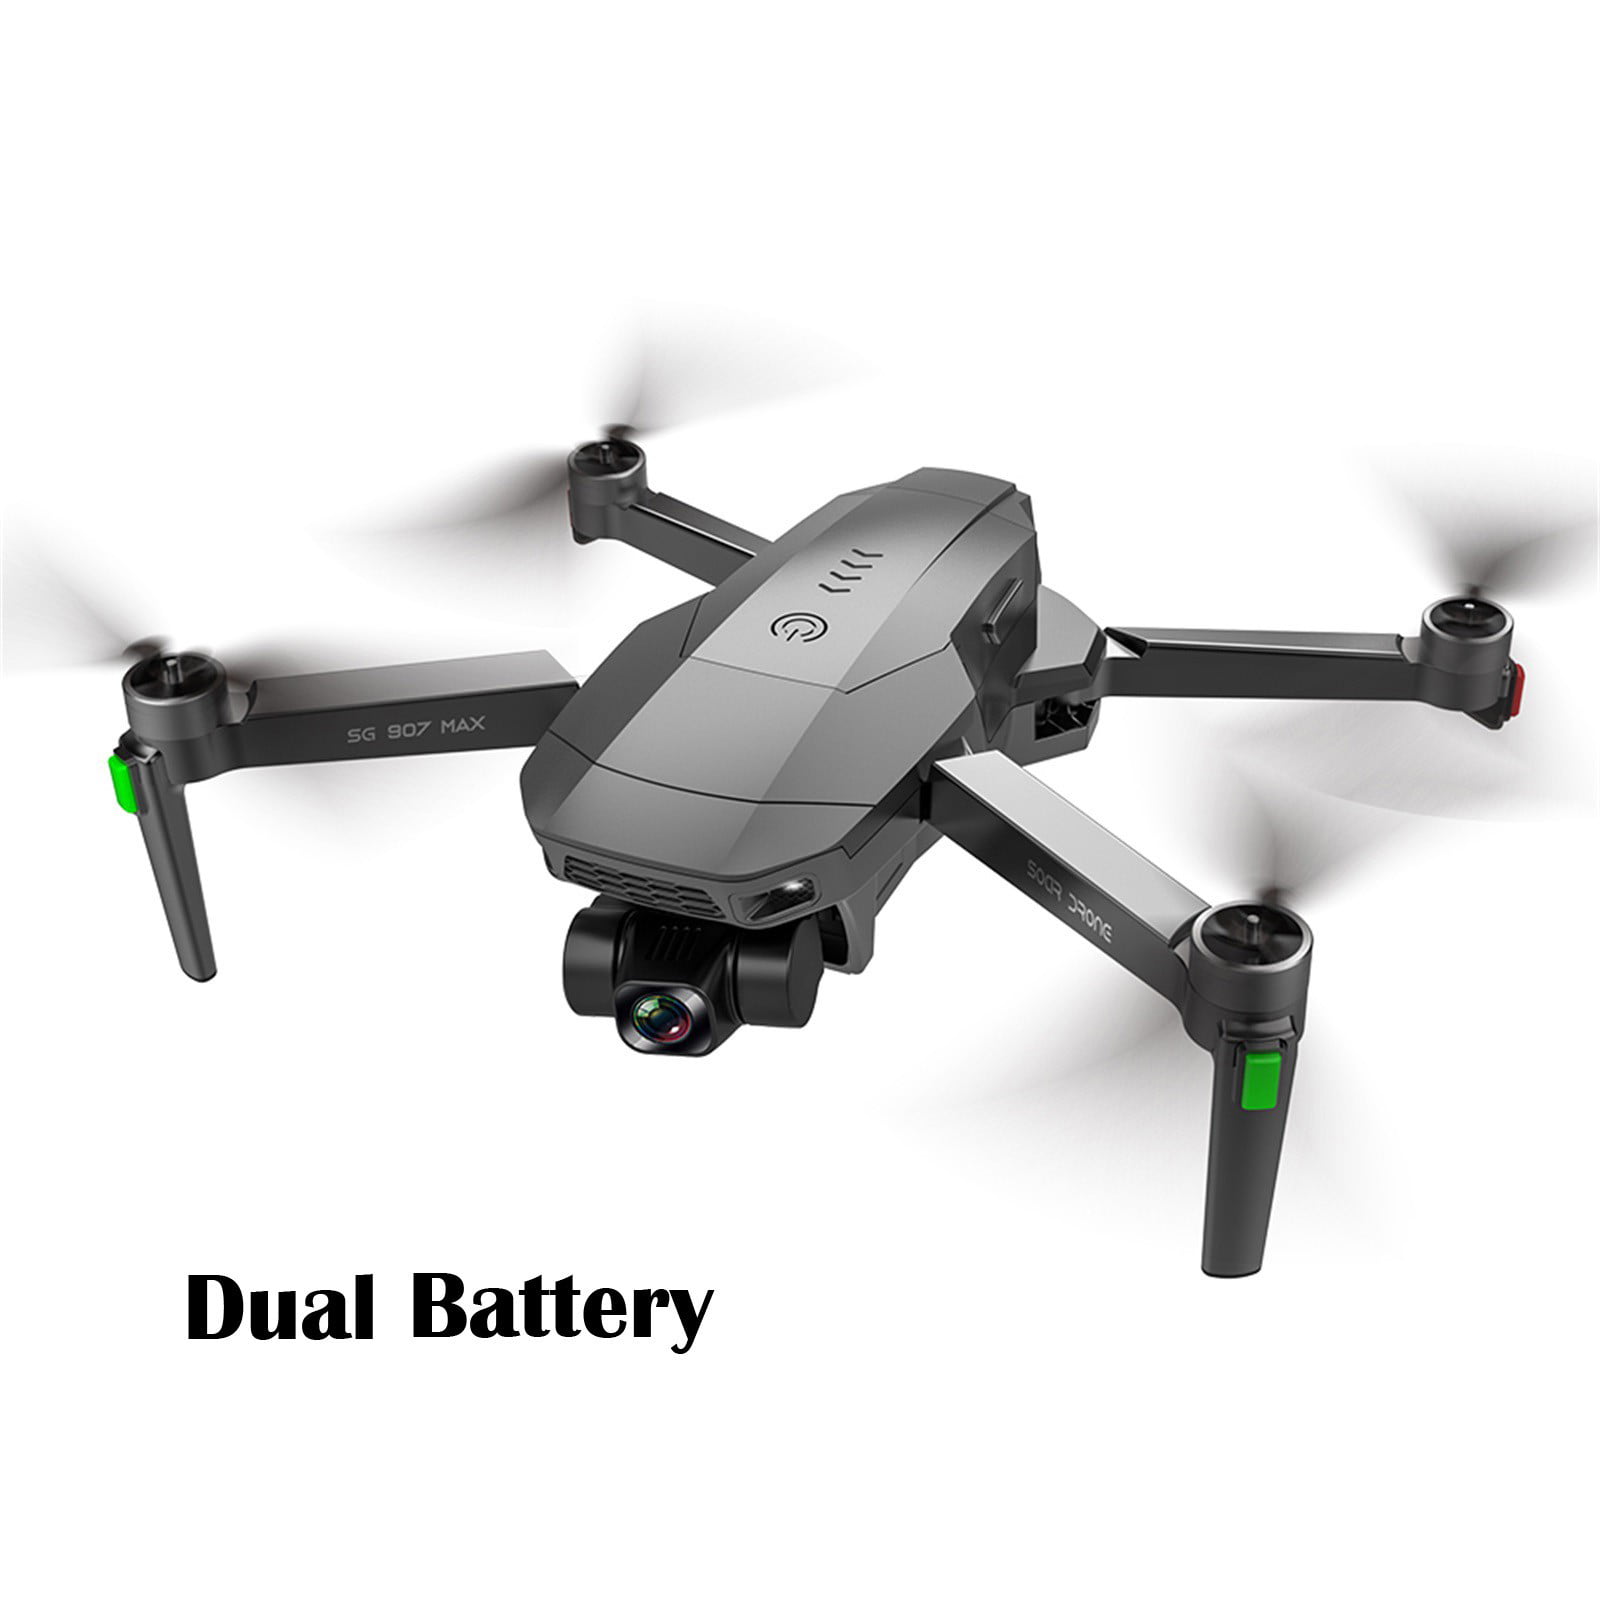 2/3 Battery Details about   Camera Drone Foldable HD Selfie FPV Wifi 4K W/ 2.4G Remote control 